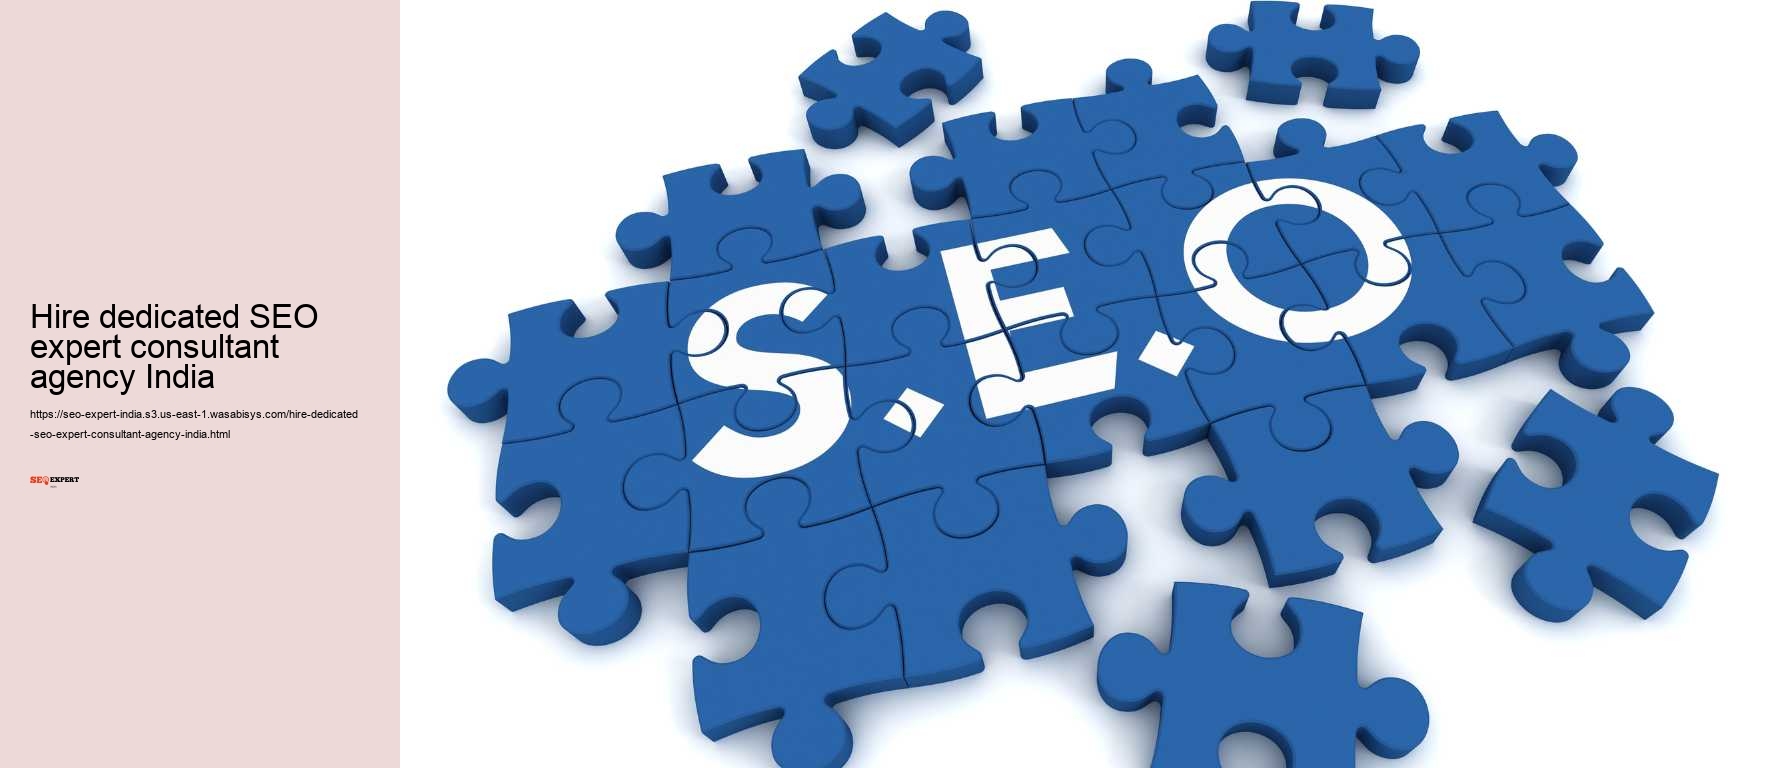 Hire dedicated SEO expert consultant agency India